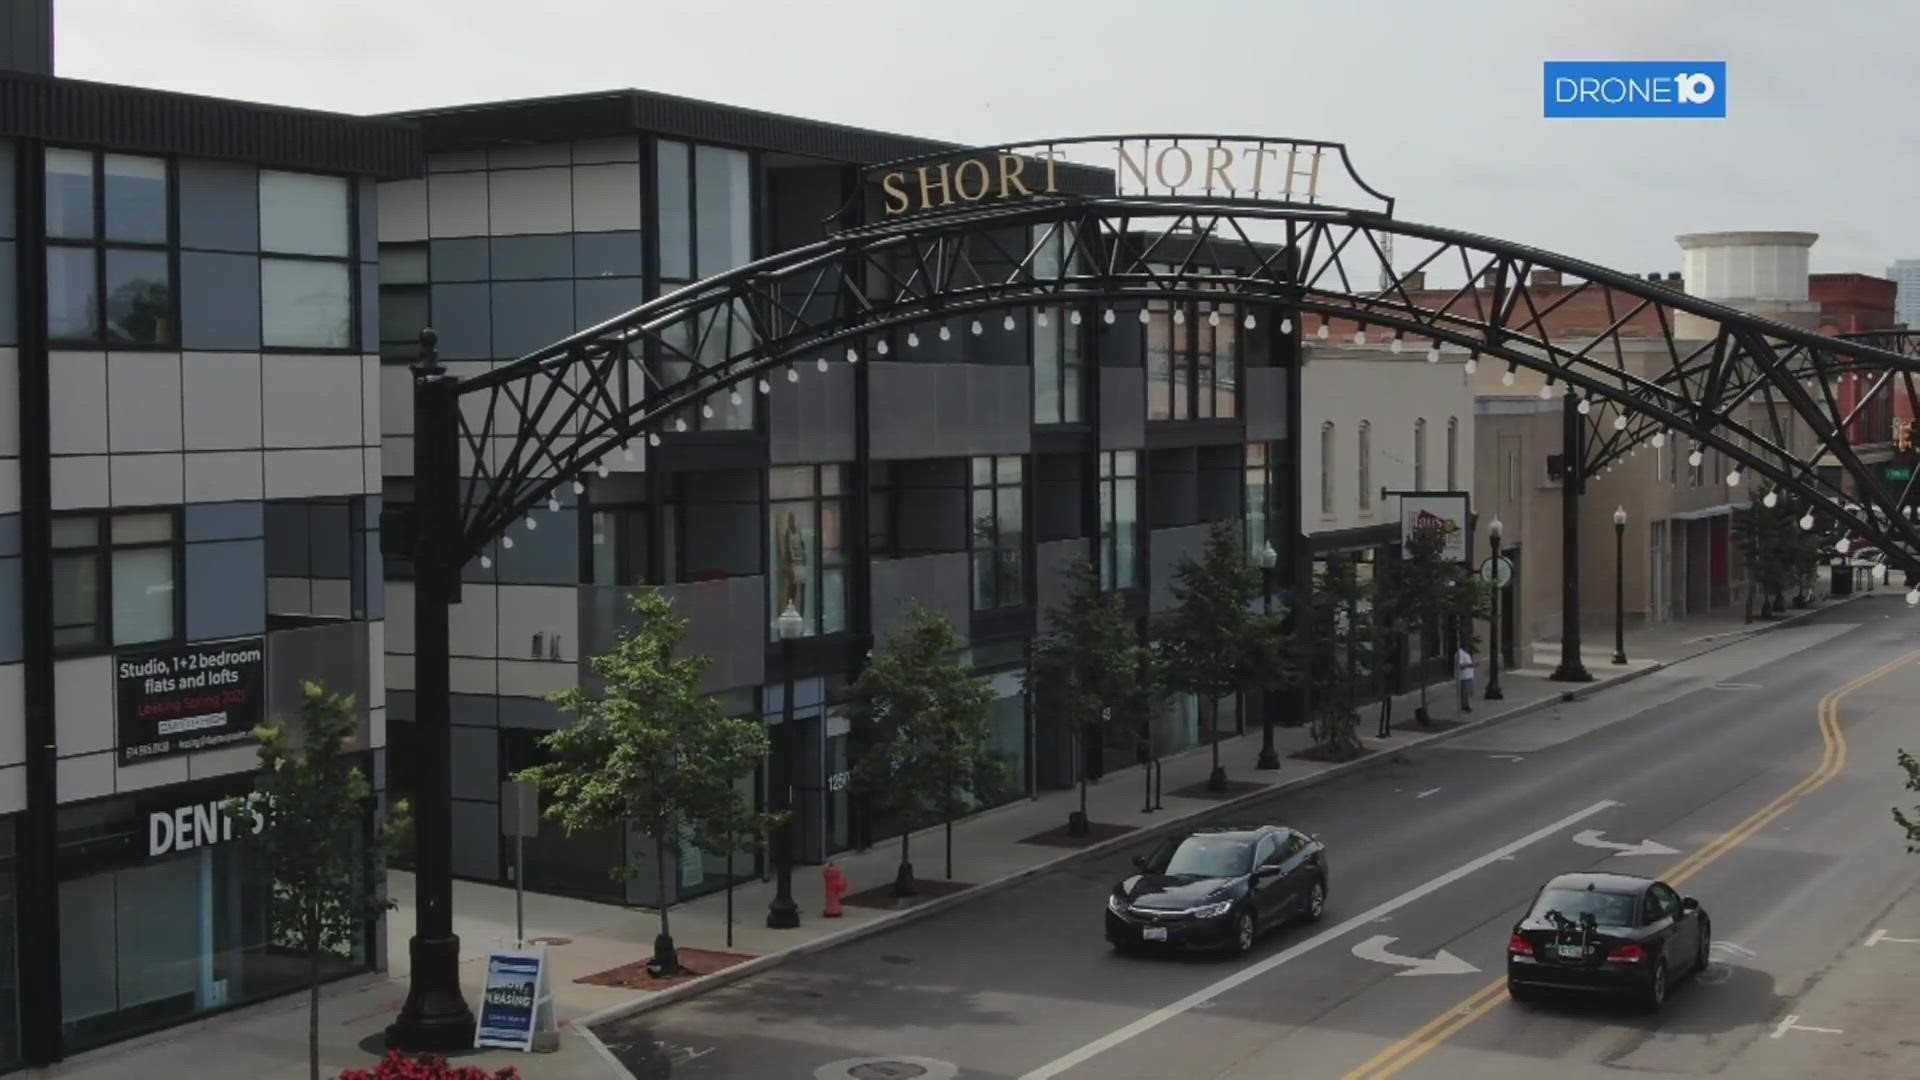 Drone 10 video gives an aerial view of the Short North Arts District.